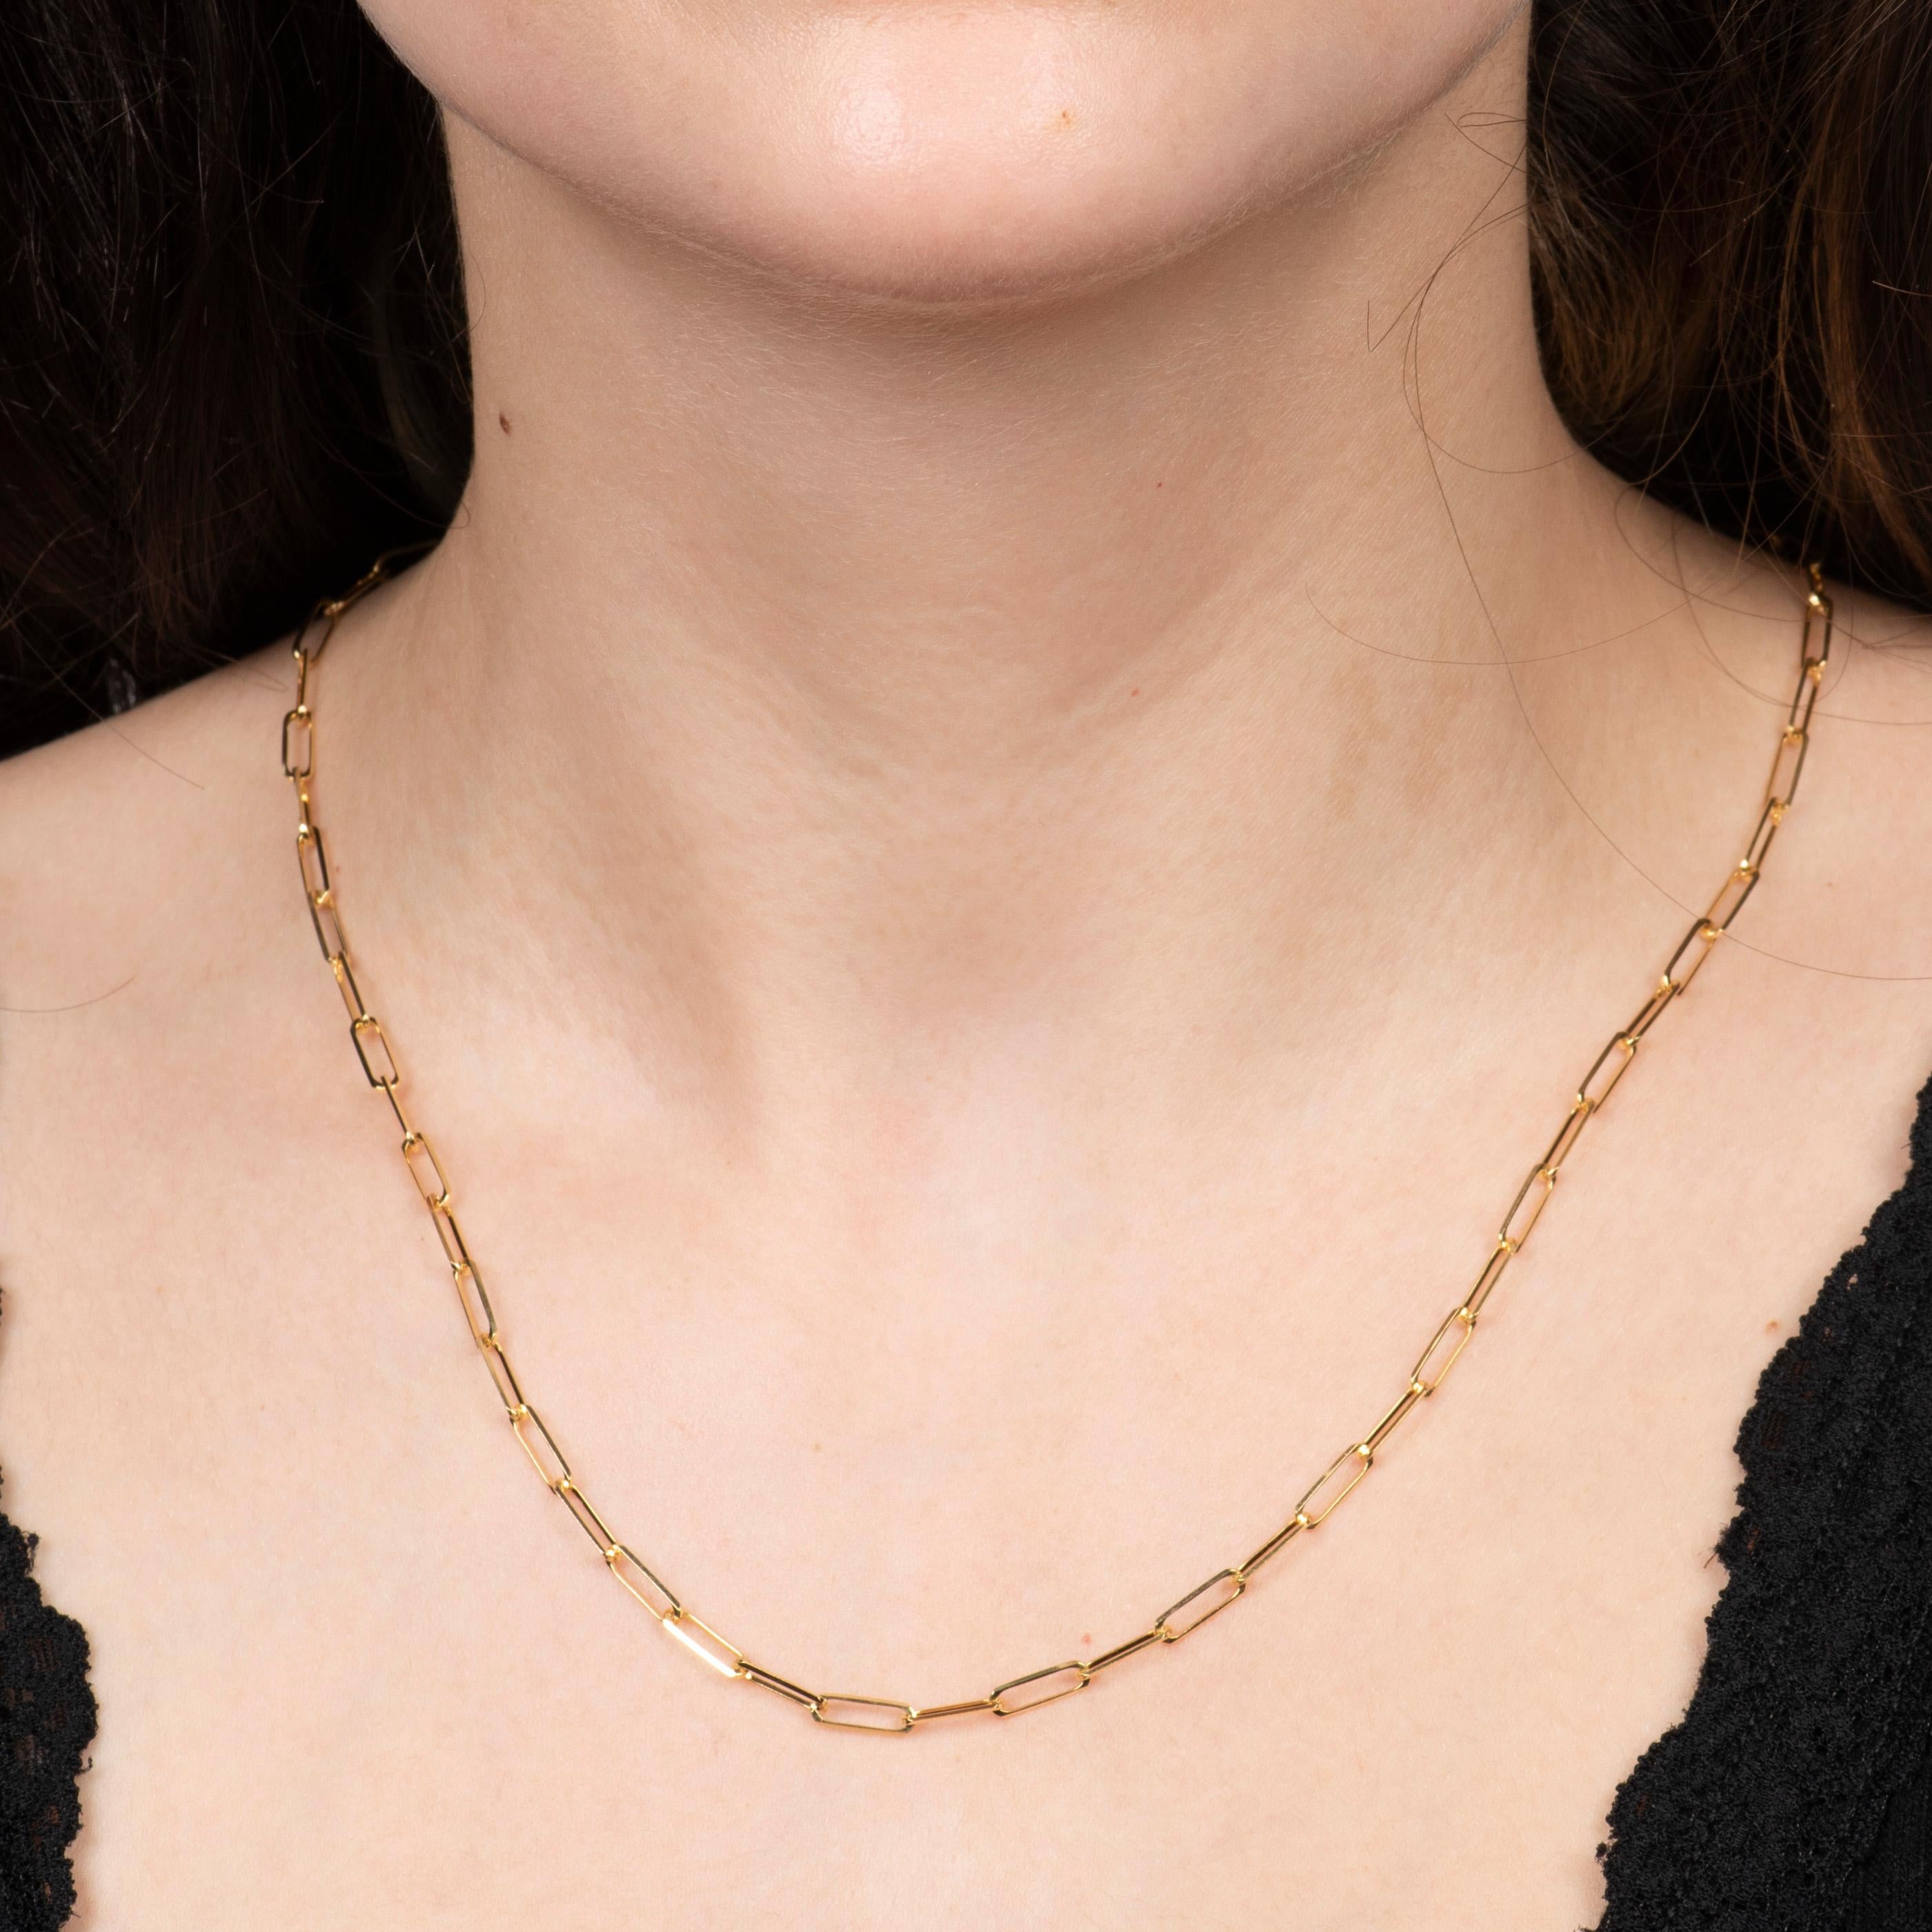 This simple necklace is a 14kt yellow gold, 18 inch paperclip chain necklace. It is the perfect necklace for layering!